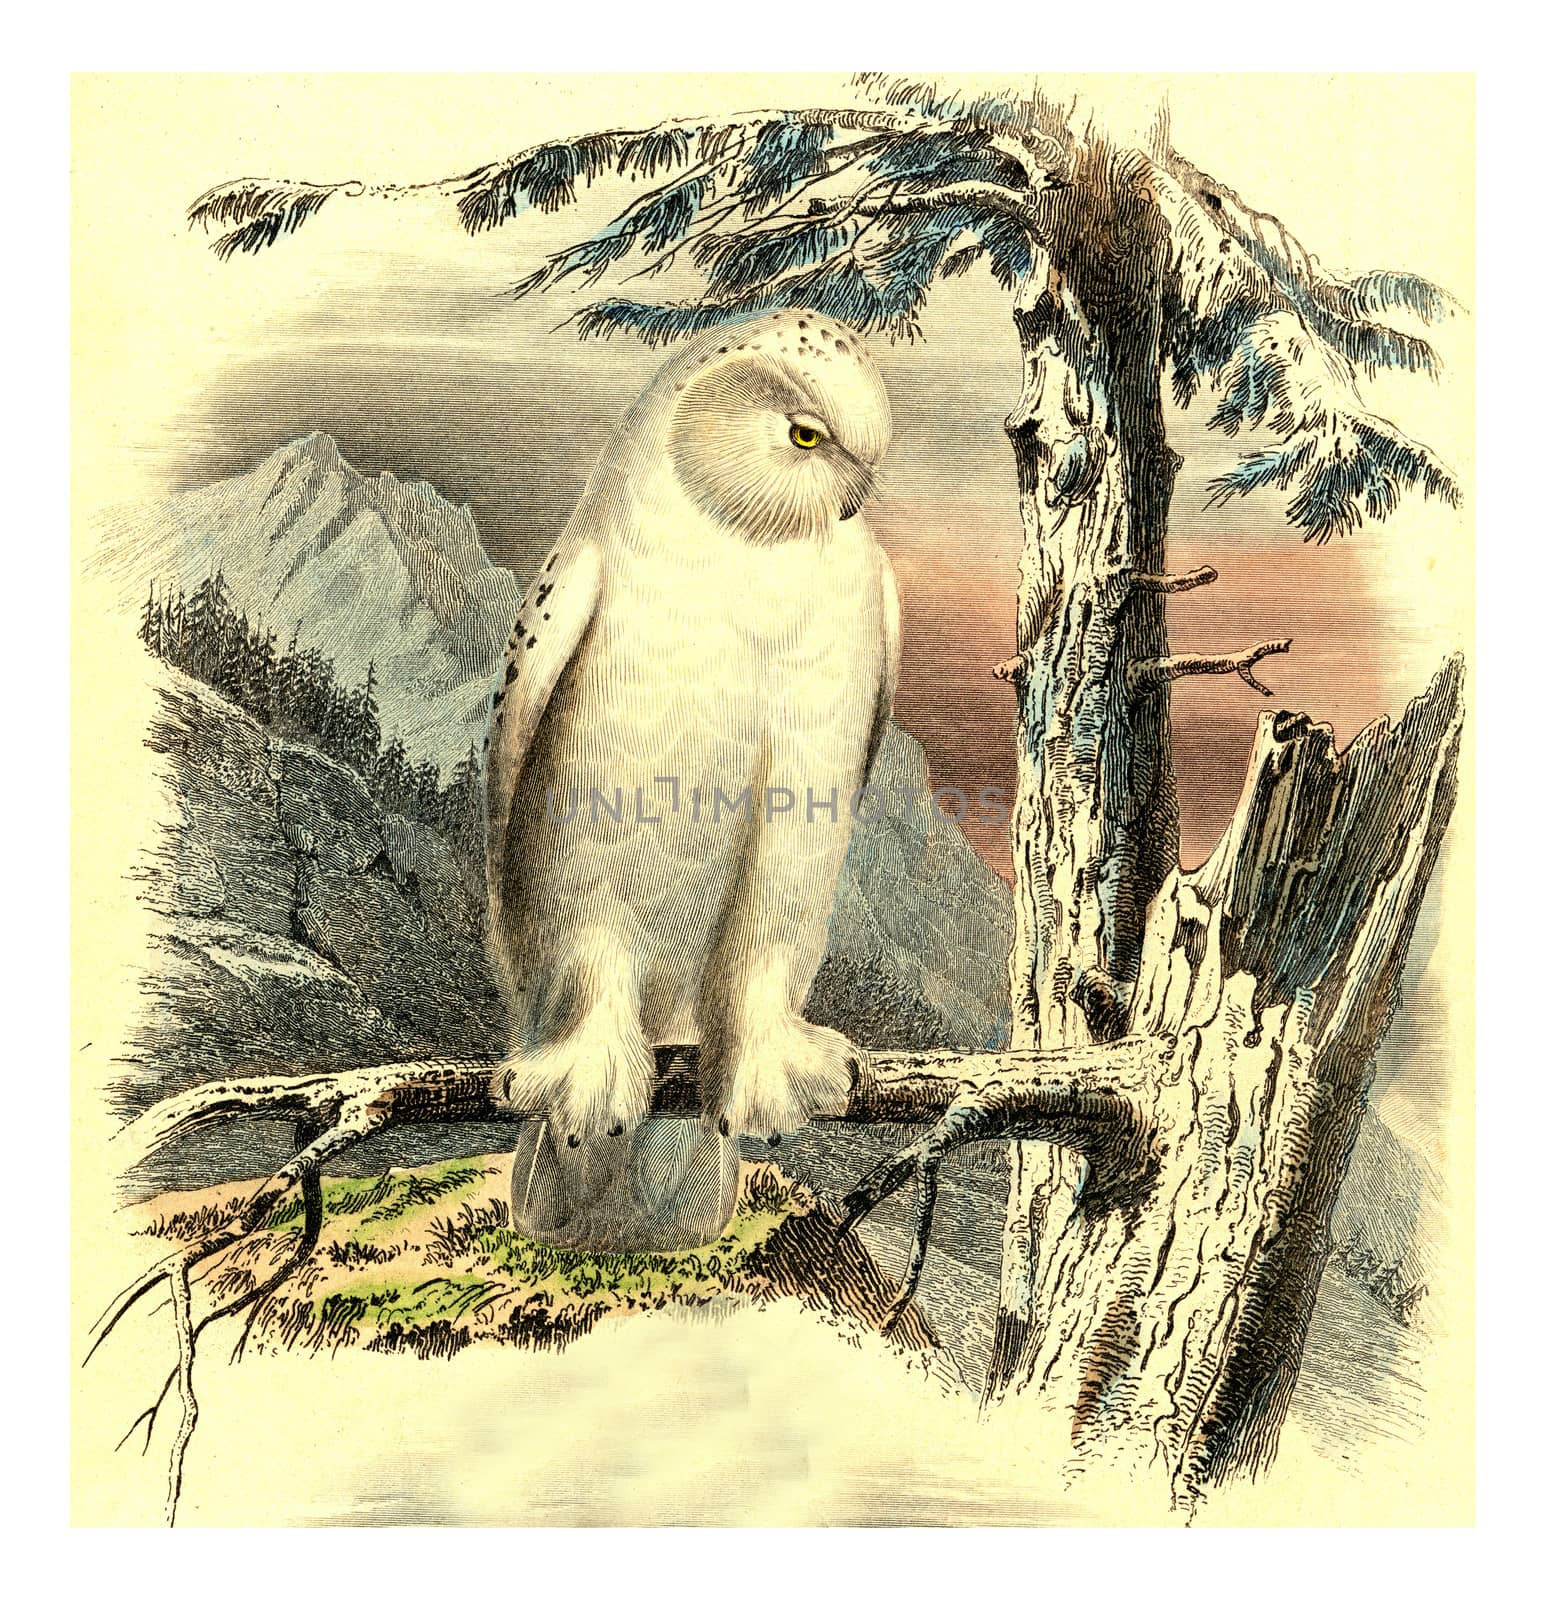 Snowy owl, vintage engraved illustration. From Buffon Complete Work.
